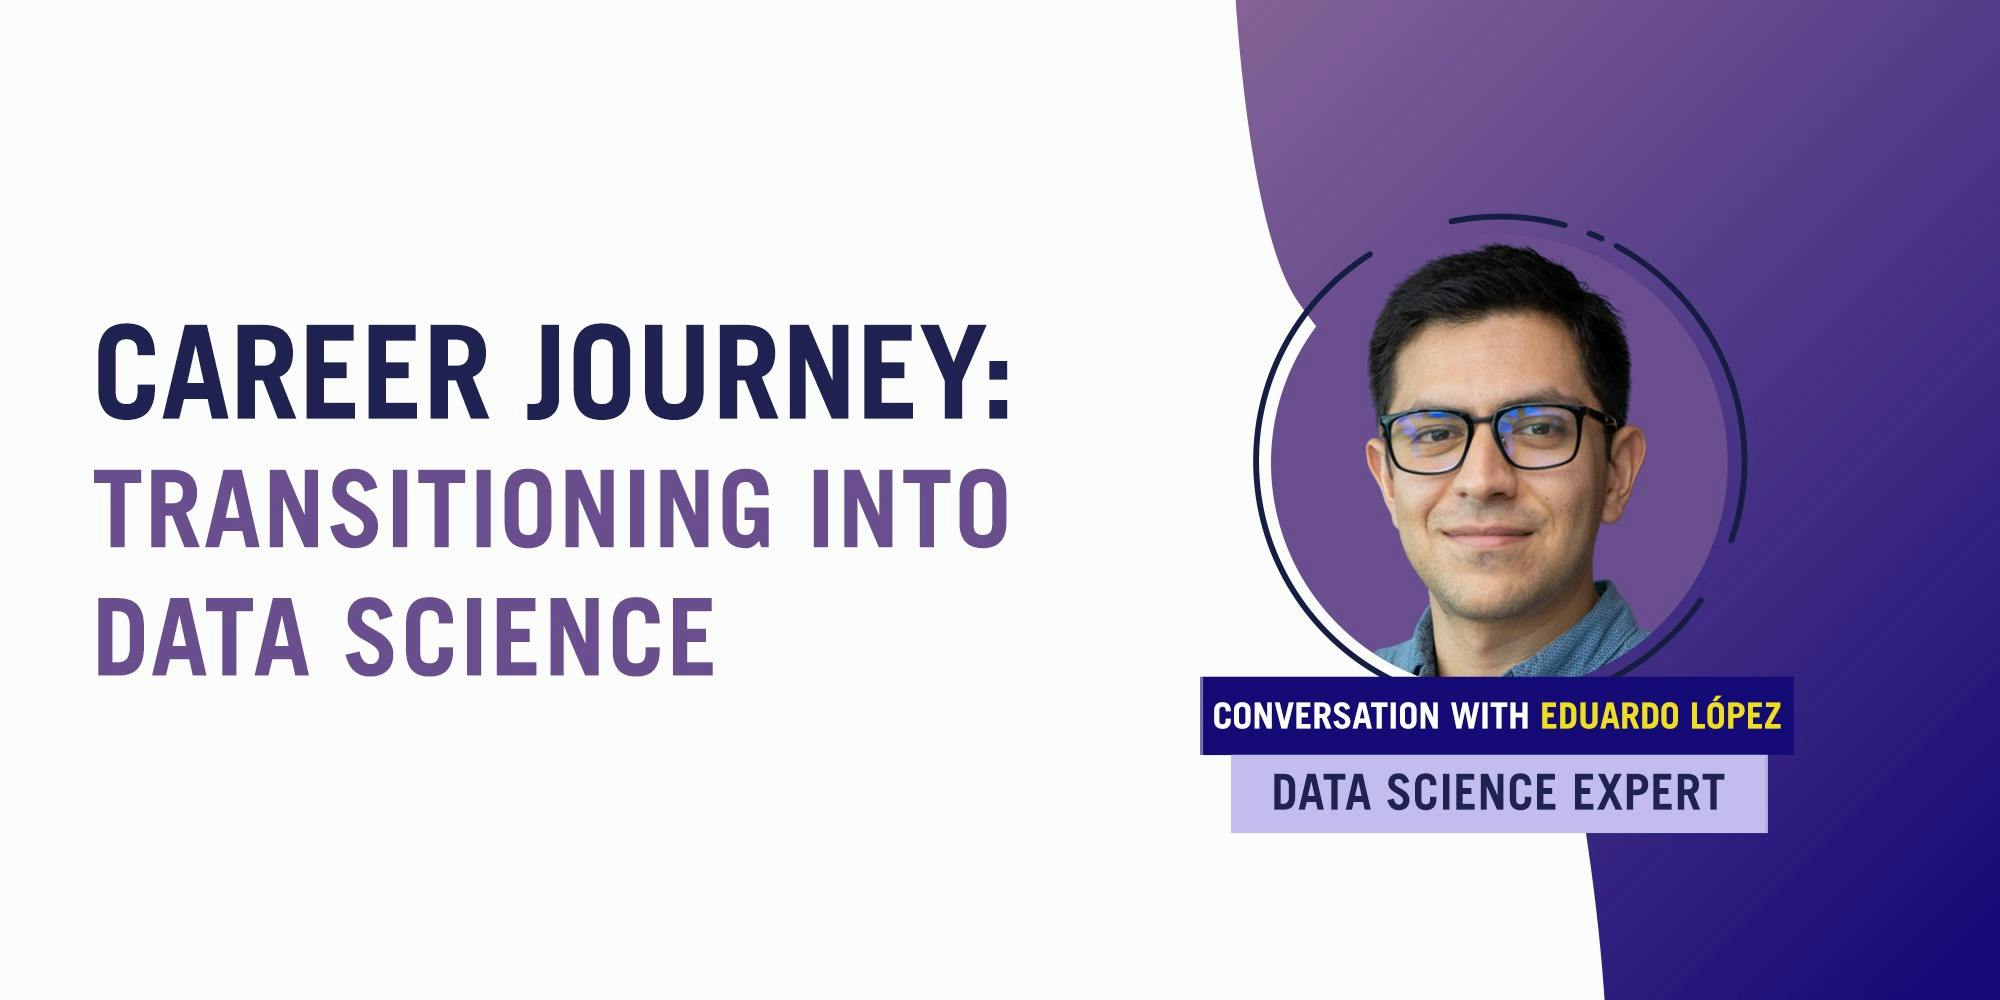 Career Journey: Transitioning into Data Science